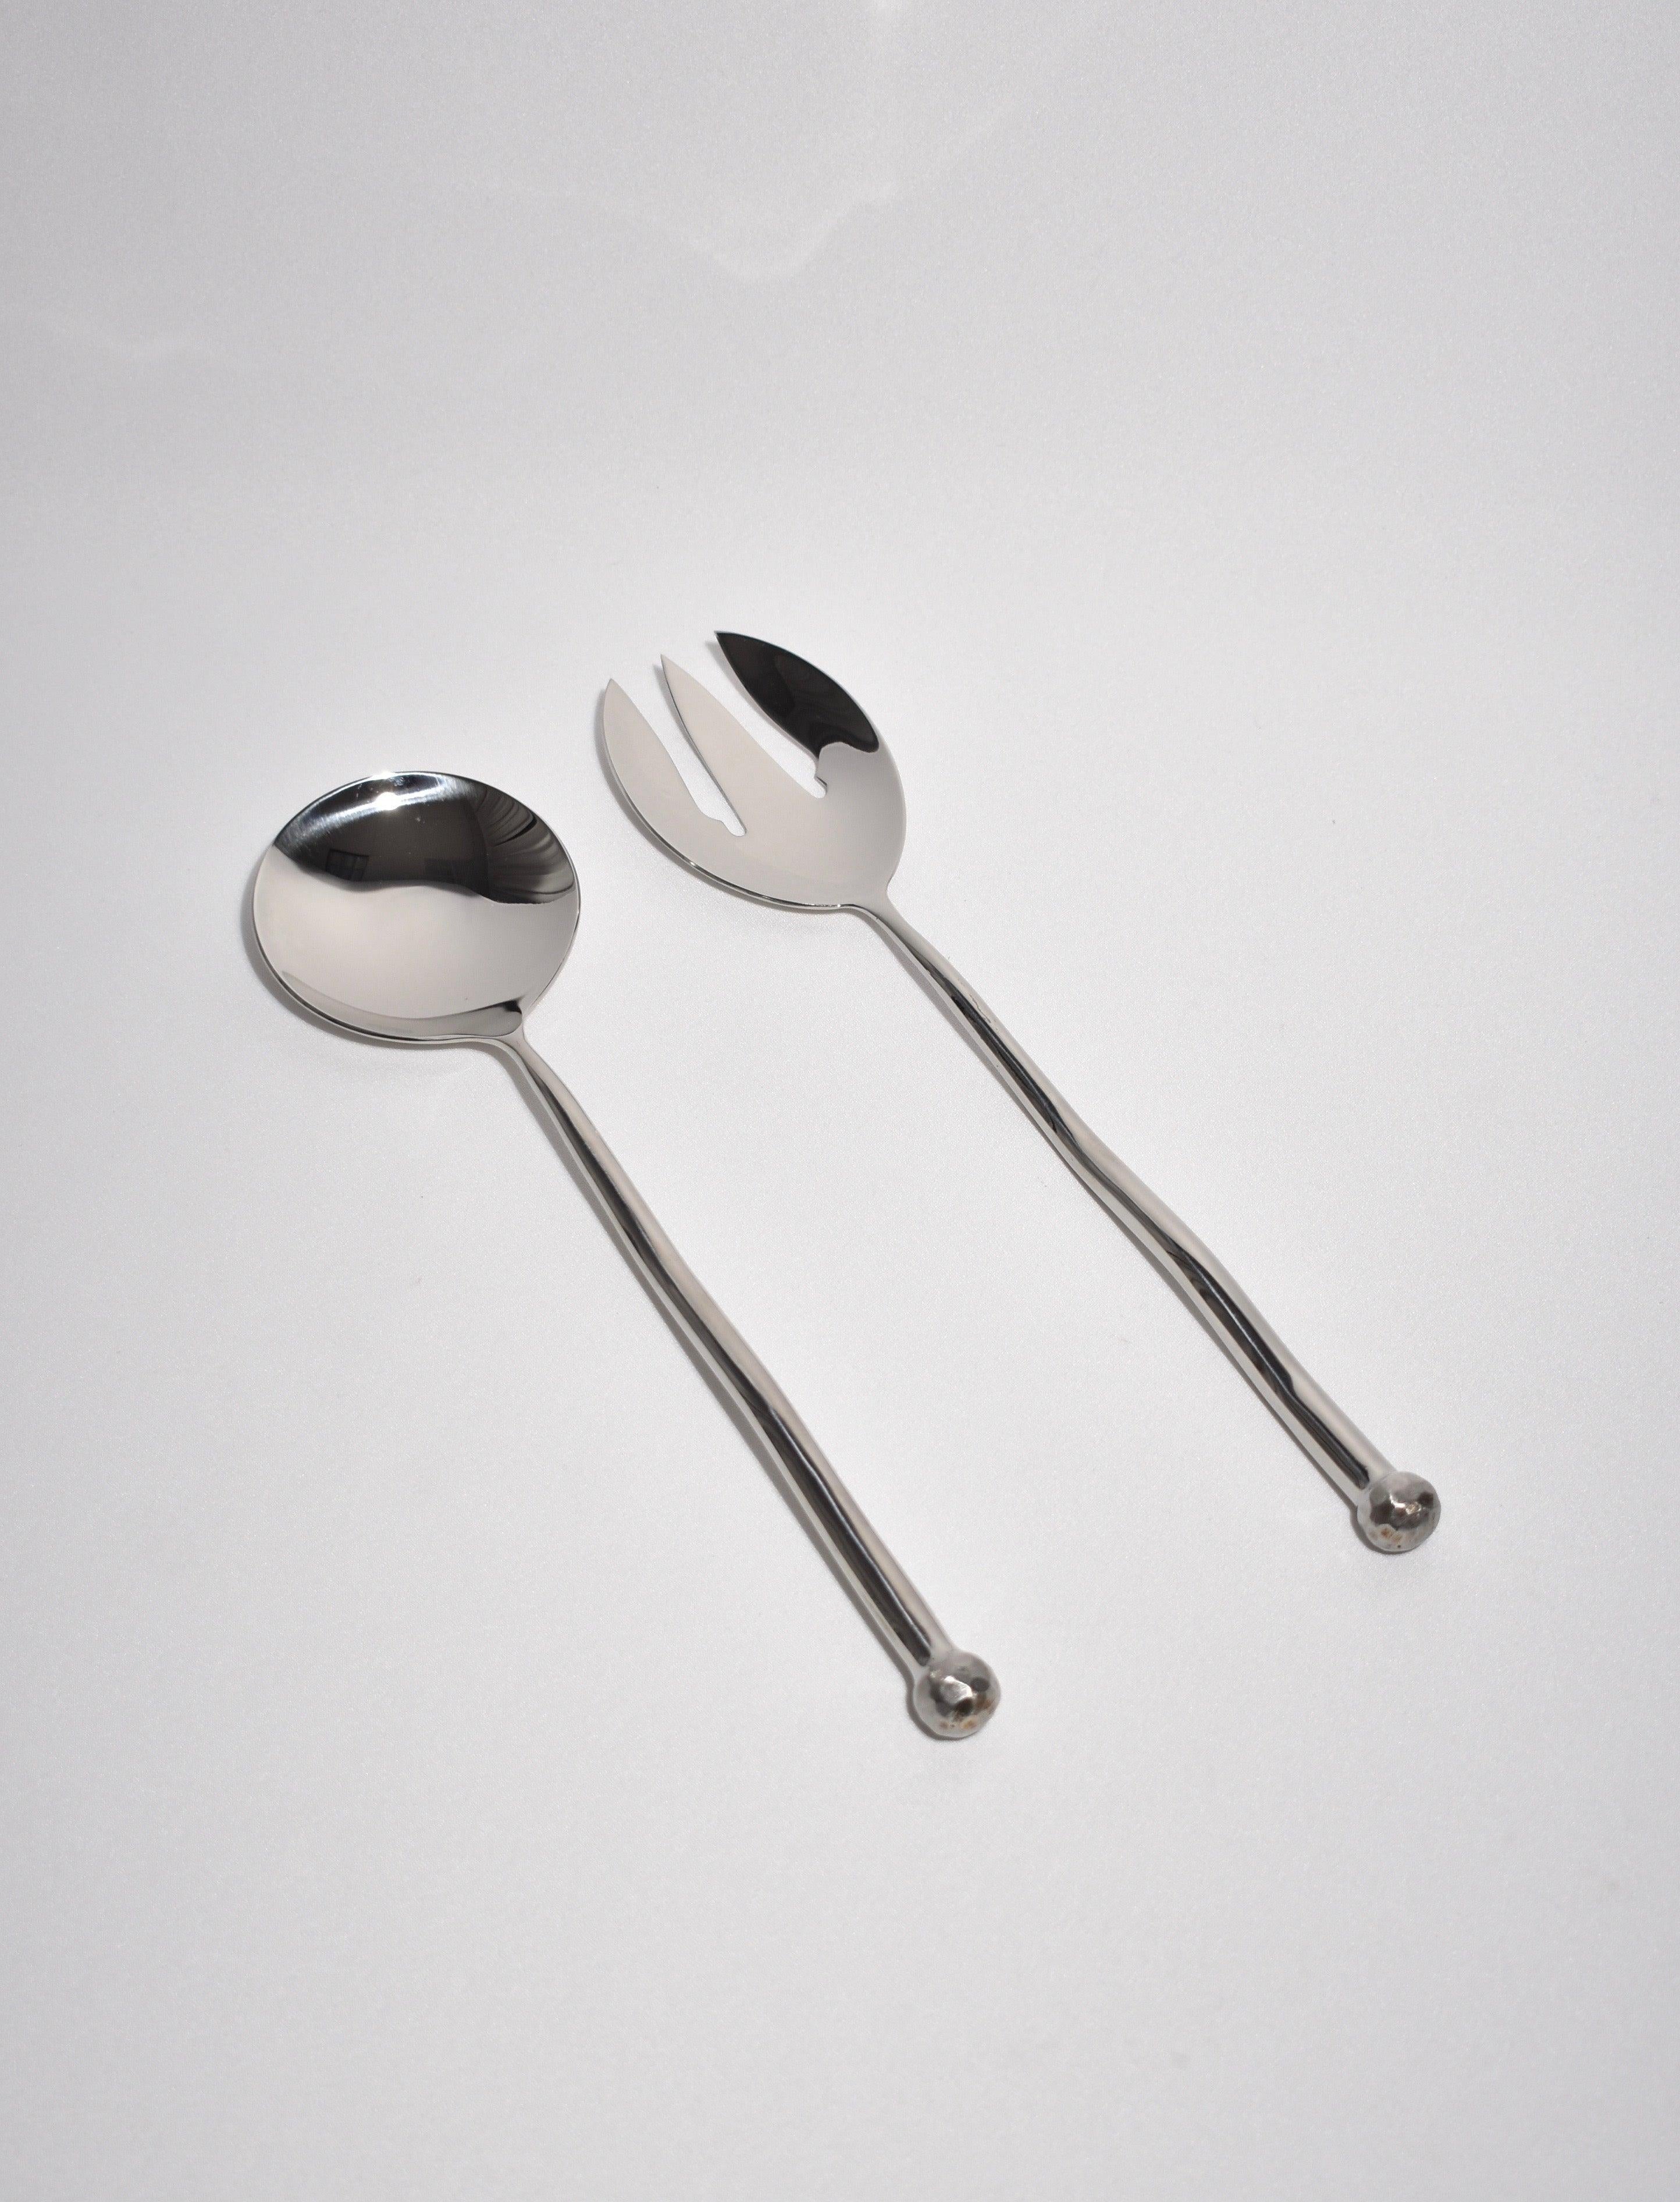 Sculptural, large stainless steel salad serving set in sphere pattern. Each piece features an undulating handle and hammered textured knob on end. Impressed above knob on underside of handle: 'IZABEL LAM'. 

Dimensions: 
Serving Spoon, 12